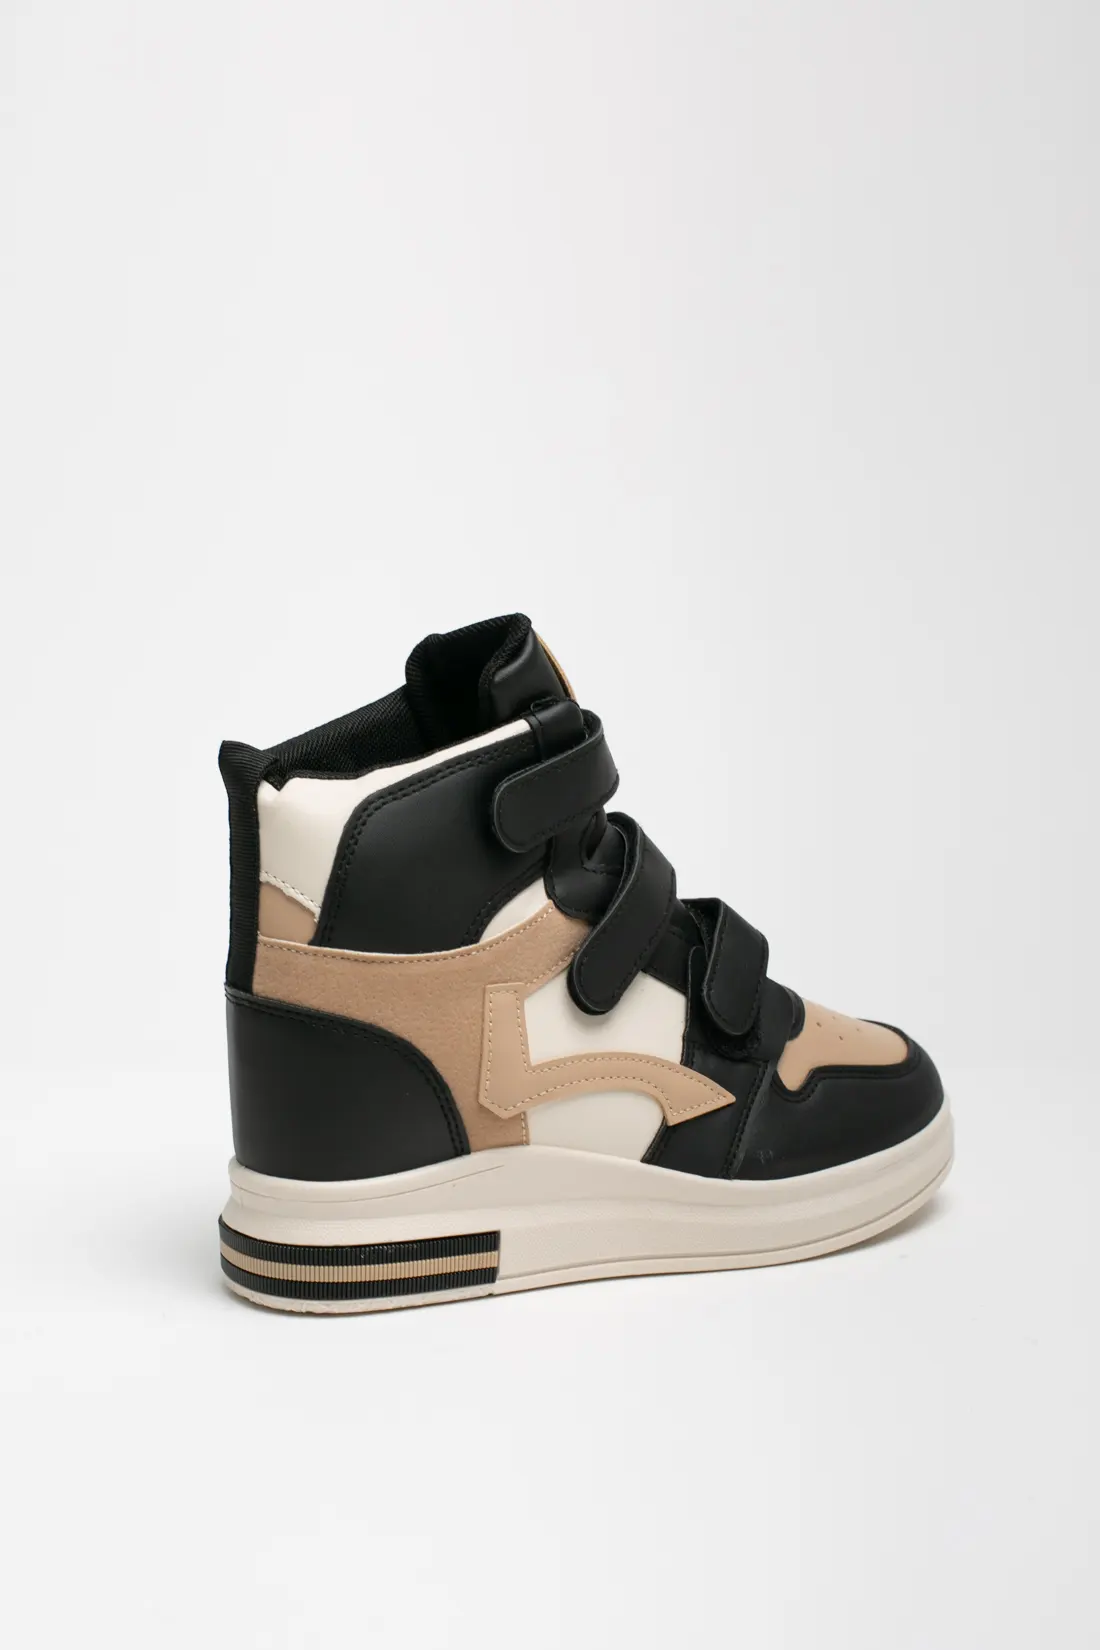 SNEAKERS SIFTER - NEGRO